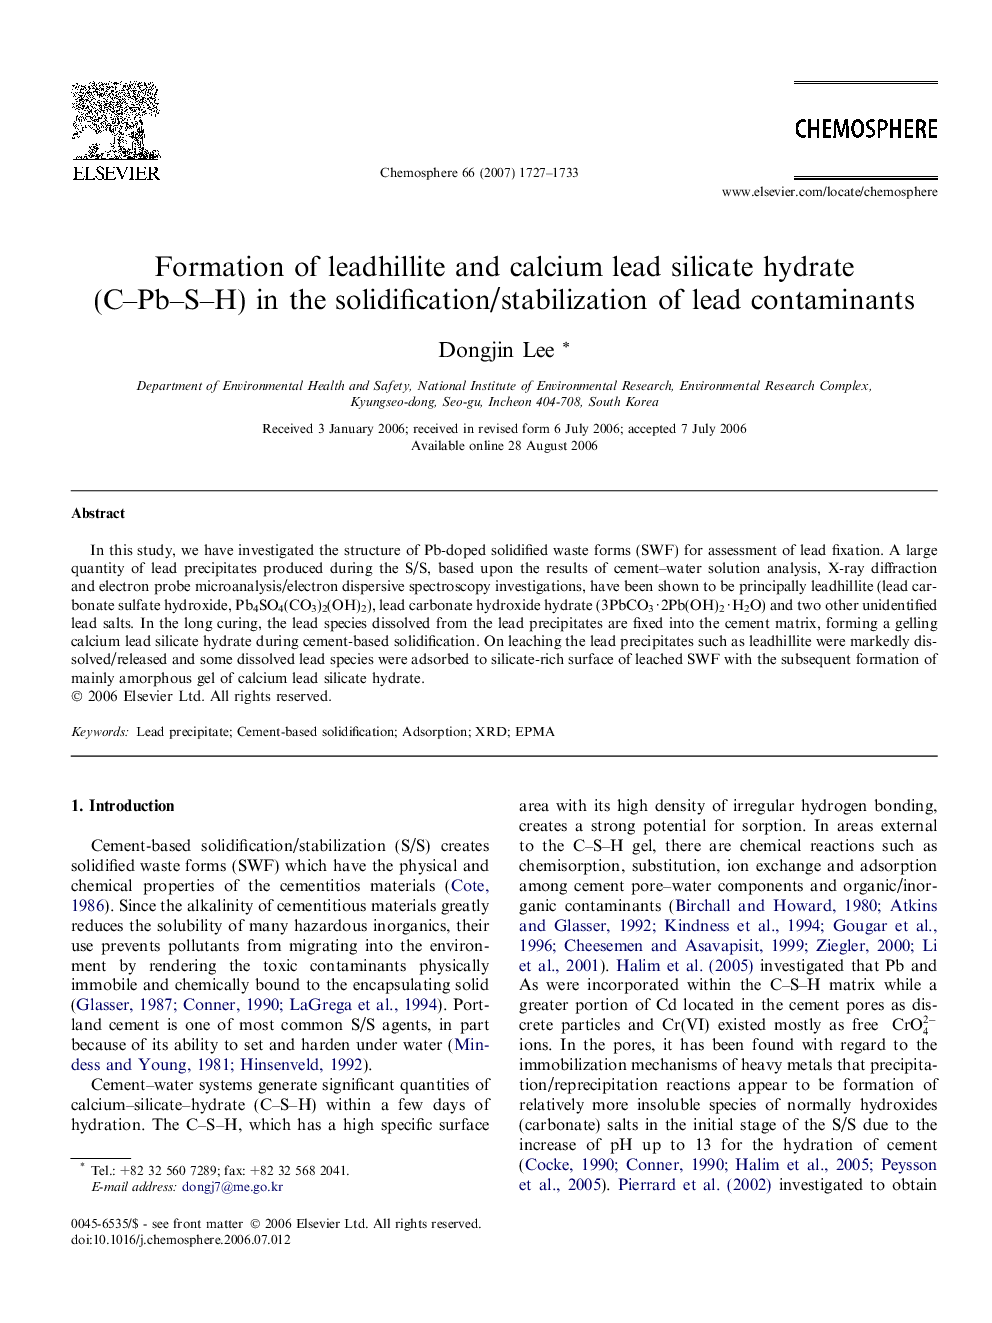 Formation of leadhillite and calcium lead silicate hydrate (C–Pb–S–H) in the solidification/stabilization of lead contaminants